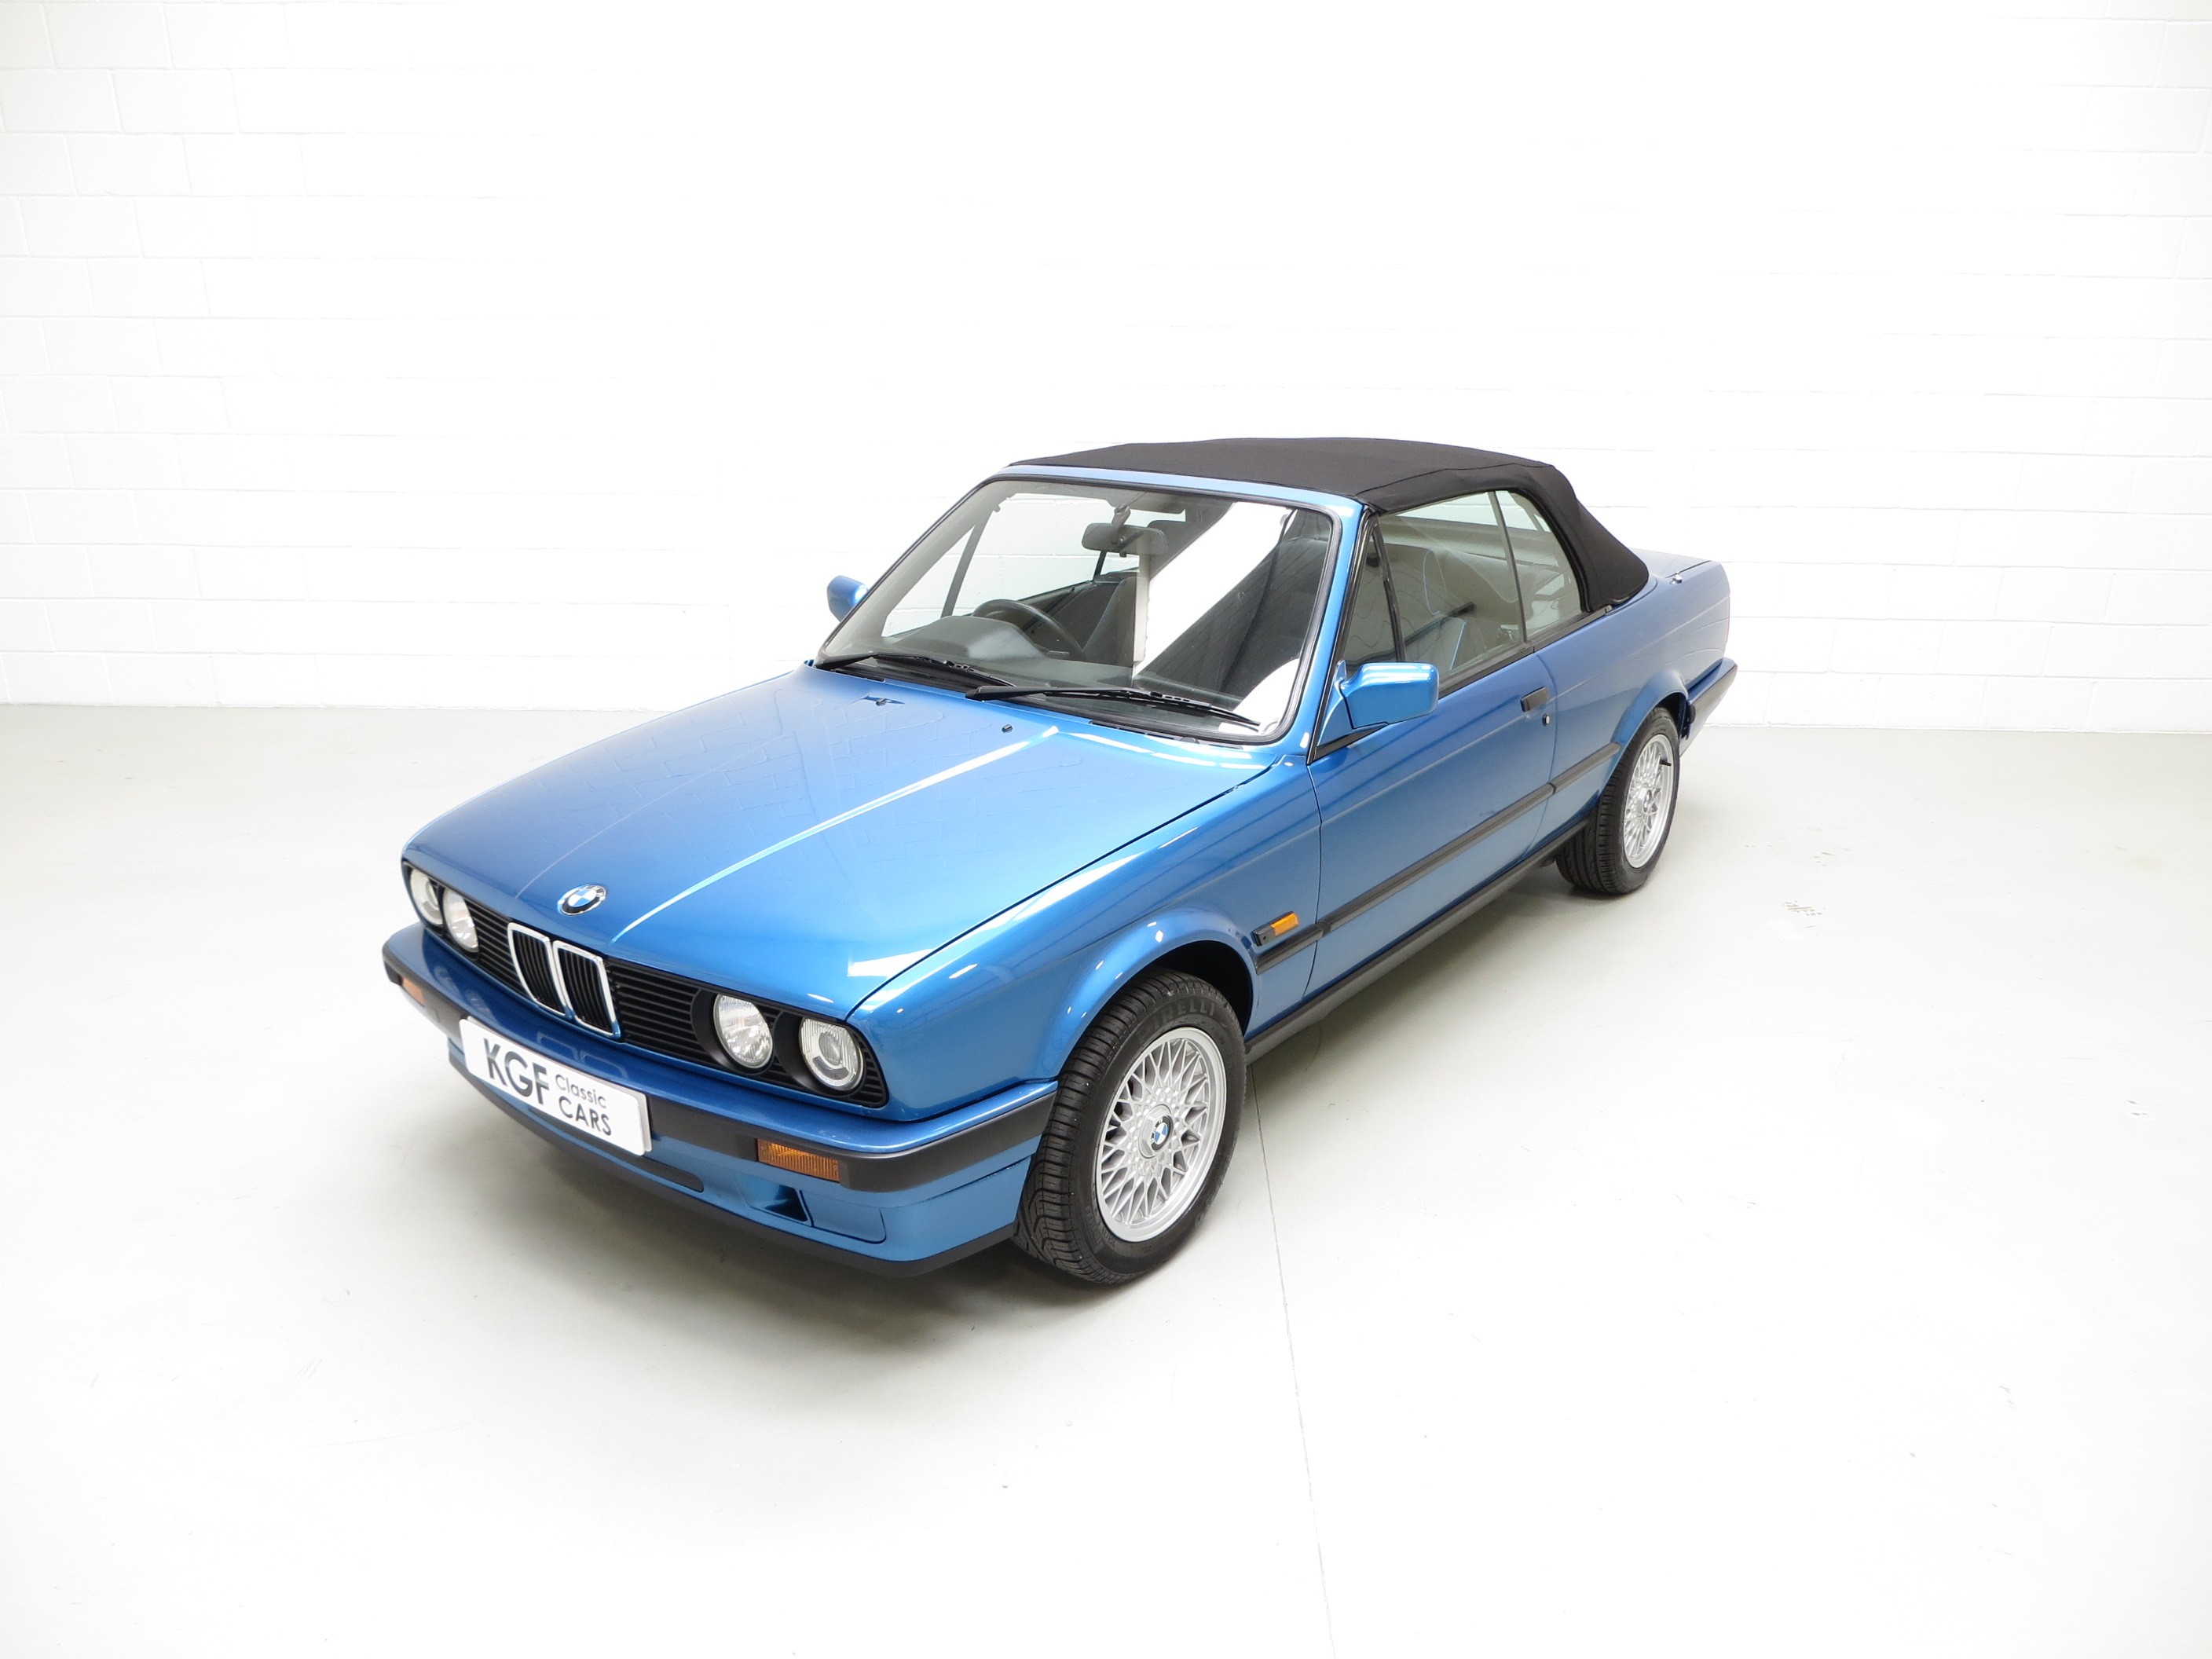 General 2816x2112 blue cars vehicle car BMW 3 Series BMW E30 BMW simple background white background German cars